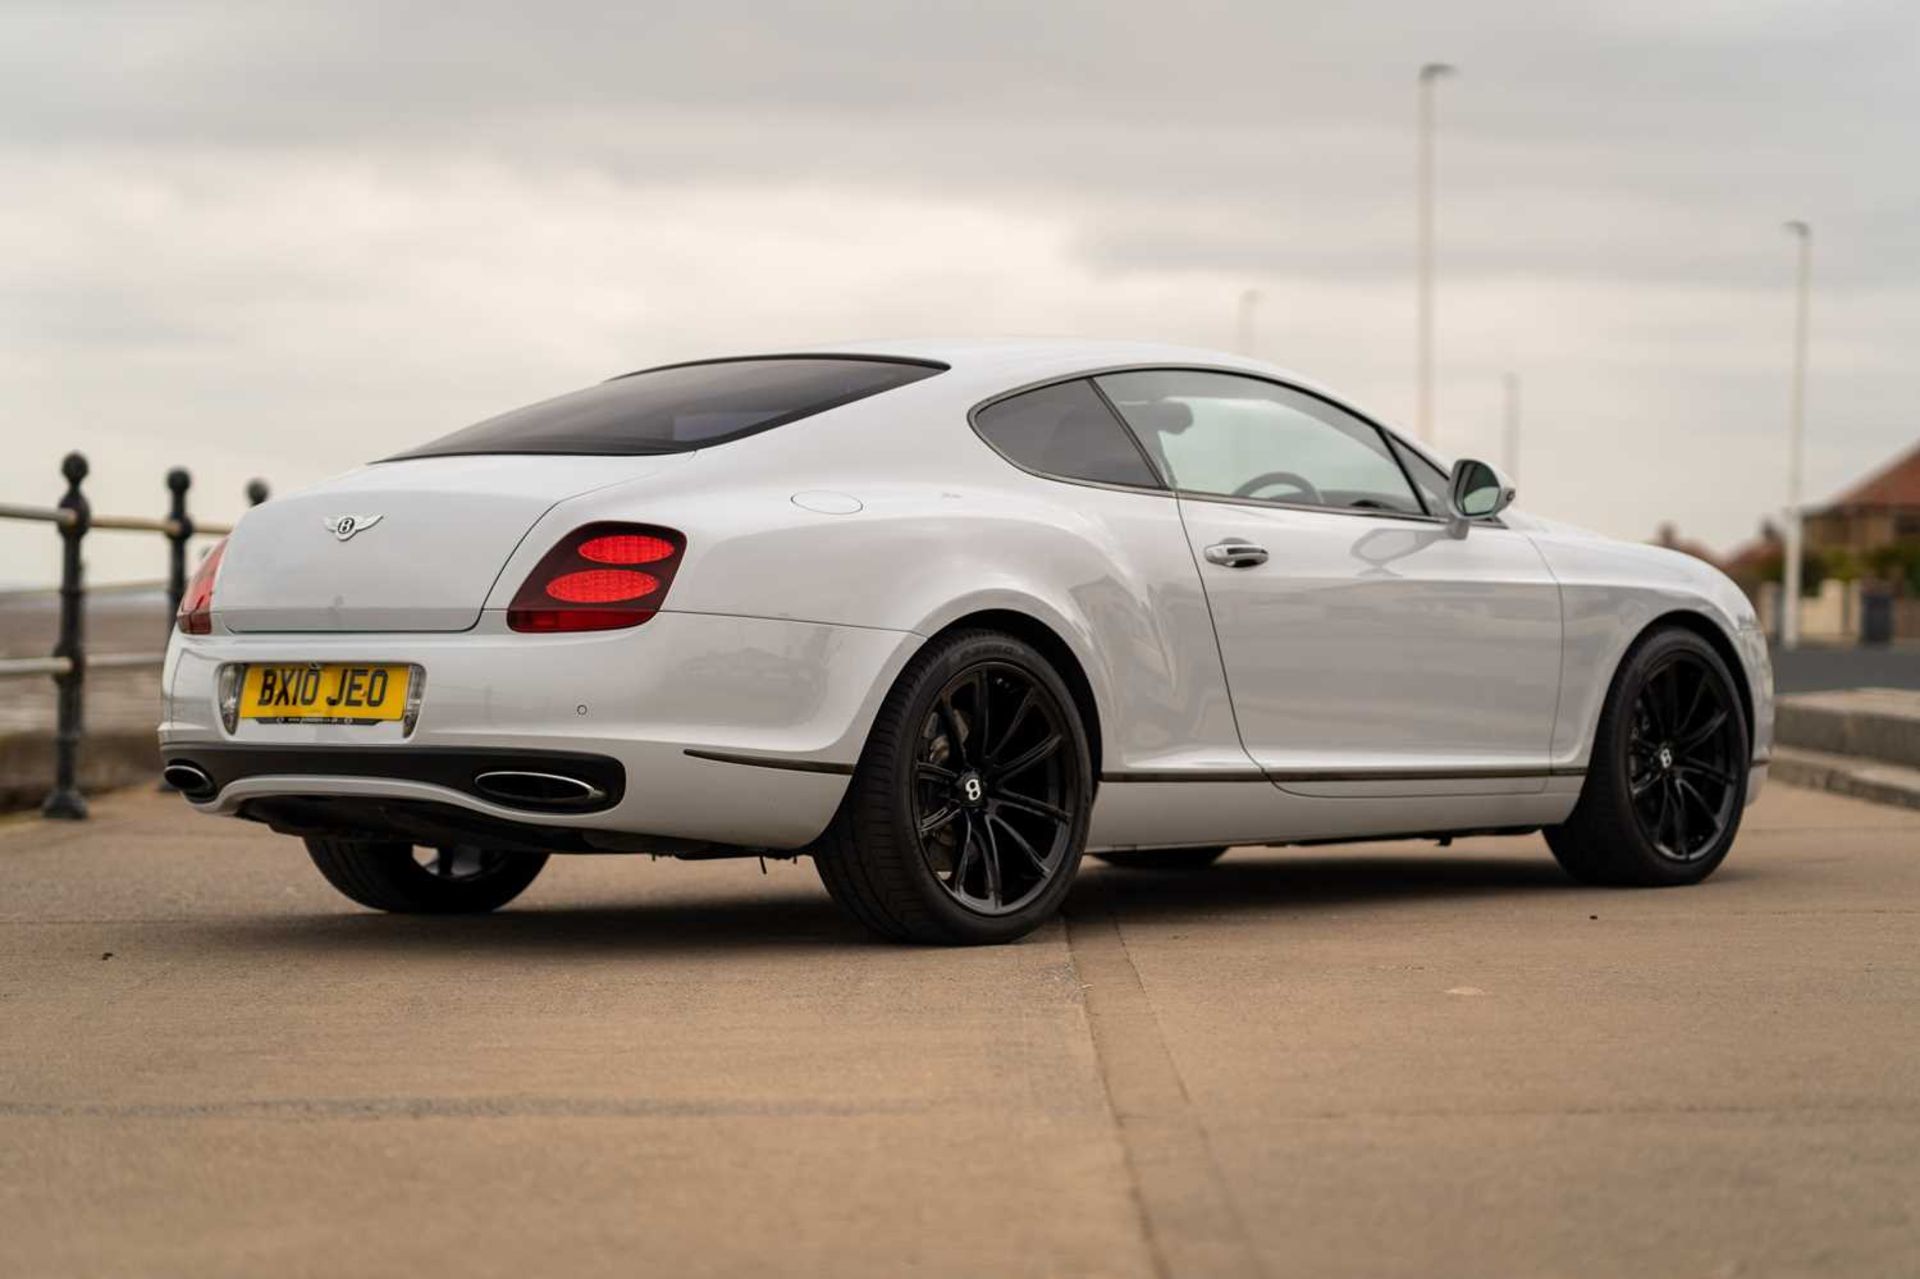 2010 Bentley Continental Supersports Only 33,000 miles with full Bentley service history - Image 7 of 52